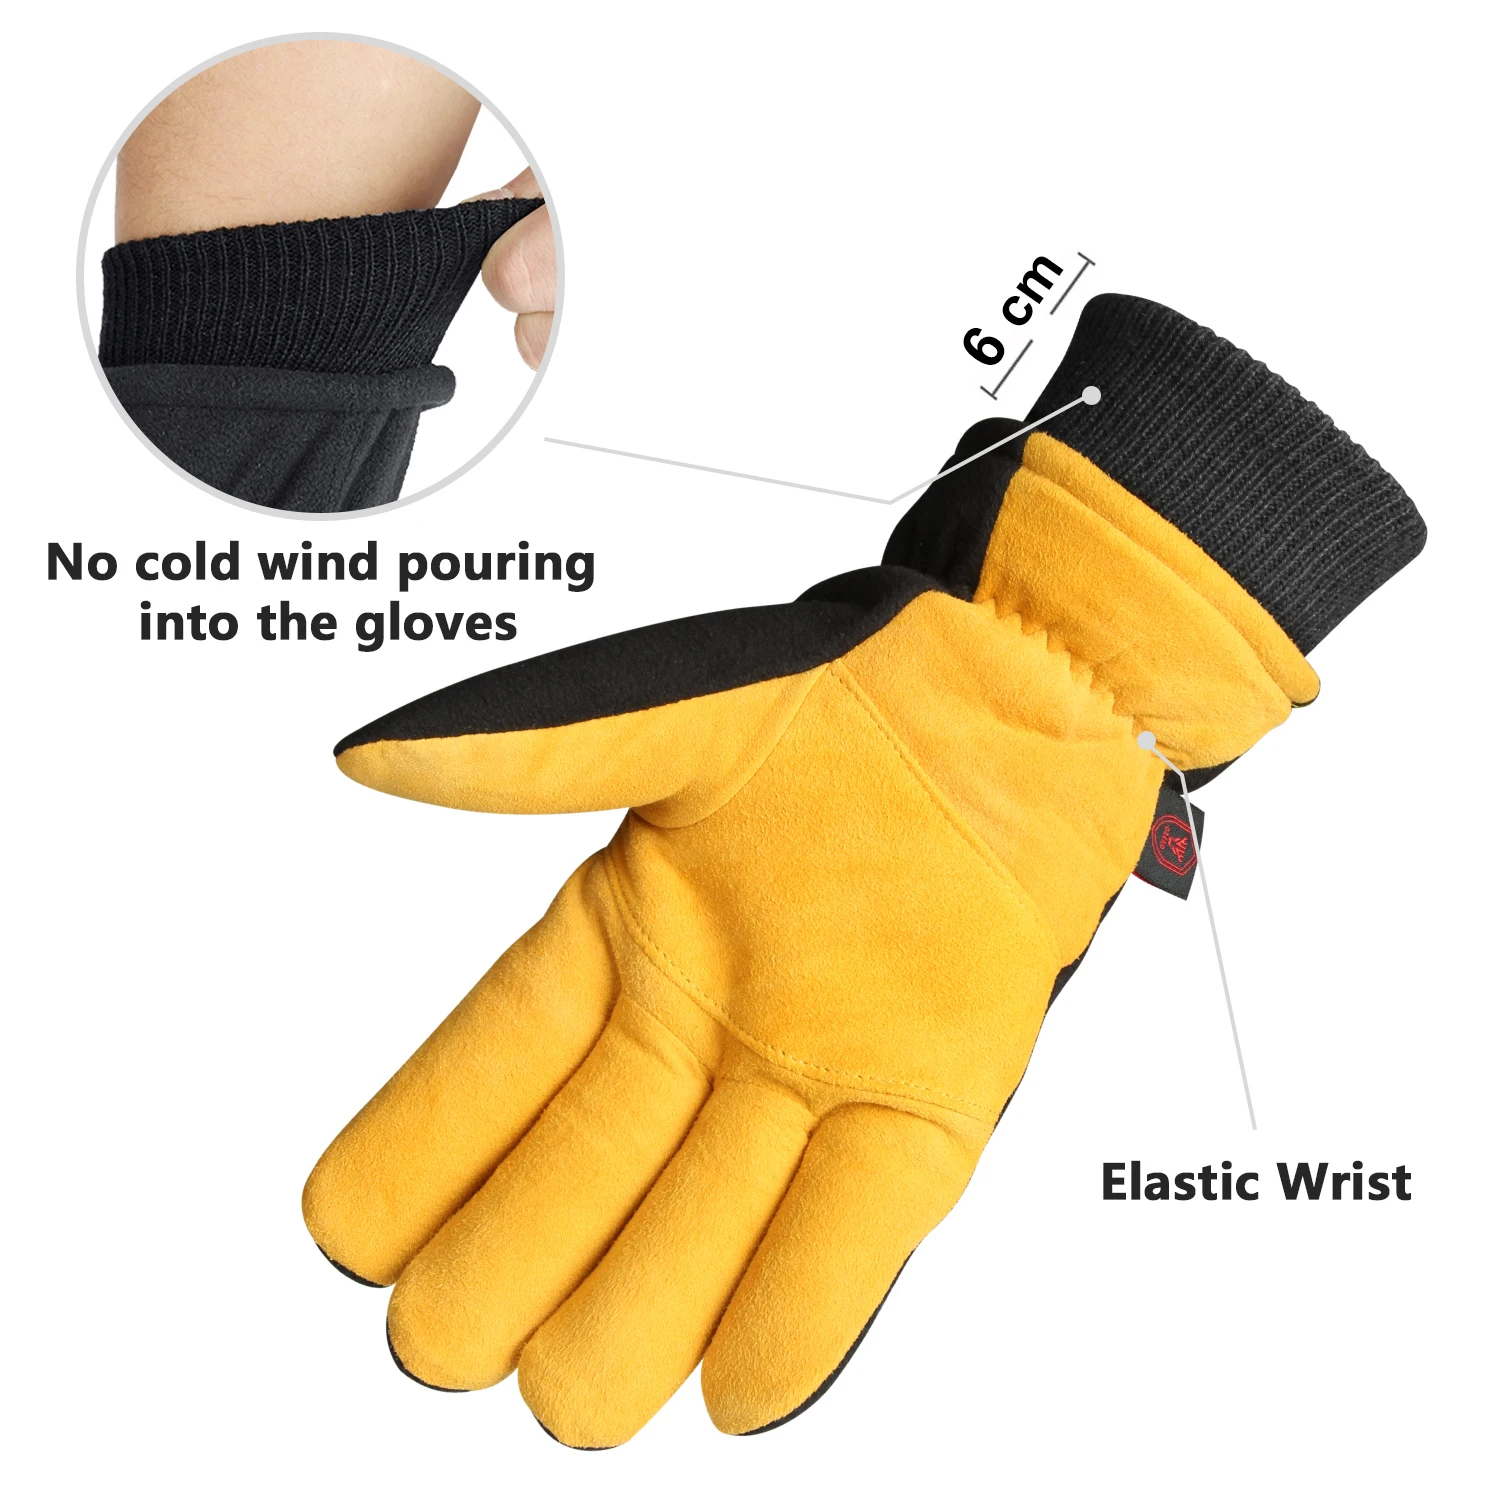 https://ae01.alicdn.com/kf/Sed957cbbbf8240e5a8d671ee470bc8bdn/OZERO-Winter-Warm-Gloves-Deerskin-Water-Resistant-Windproof-Ski-Glove-For-Driving-Cycling-Hiking-Snow-Skiing.jpg